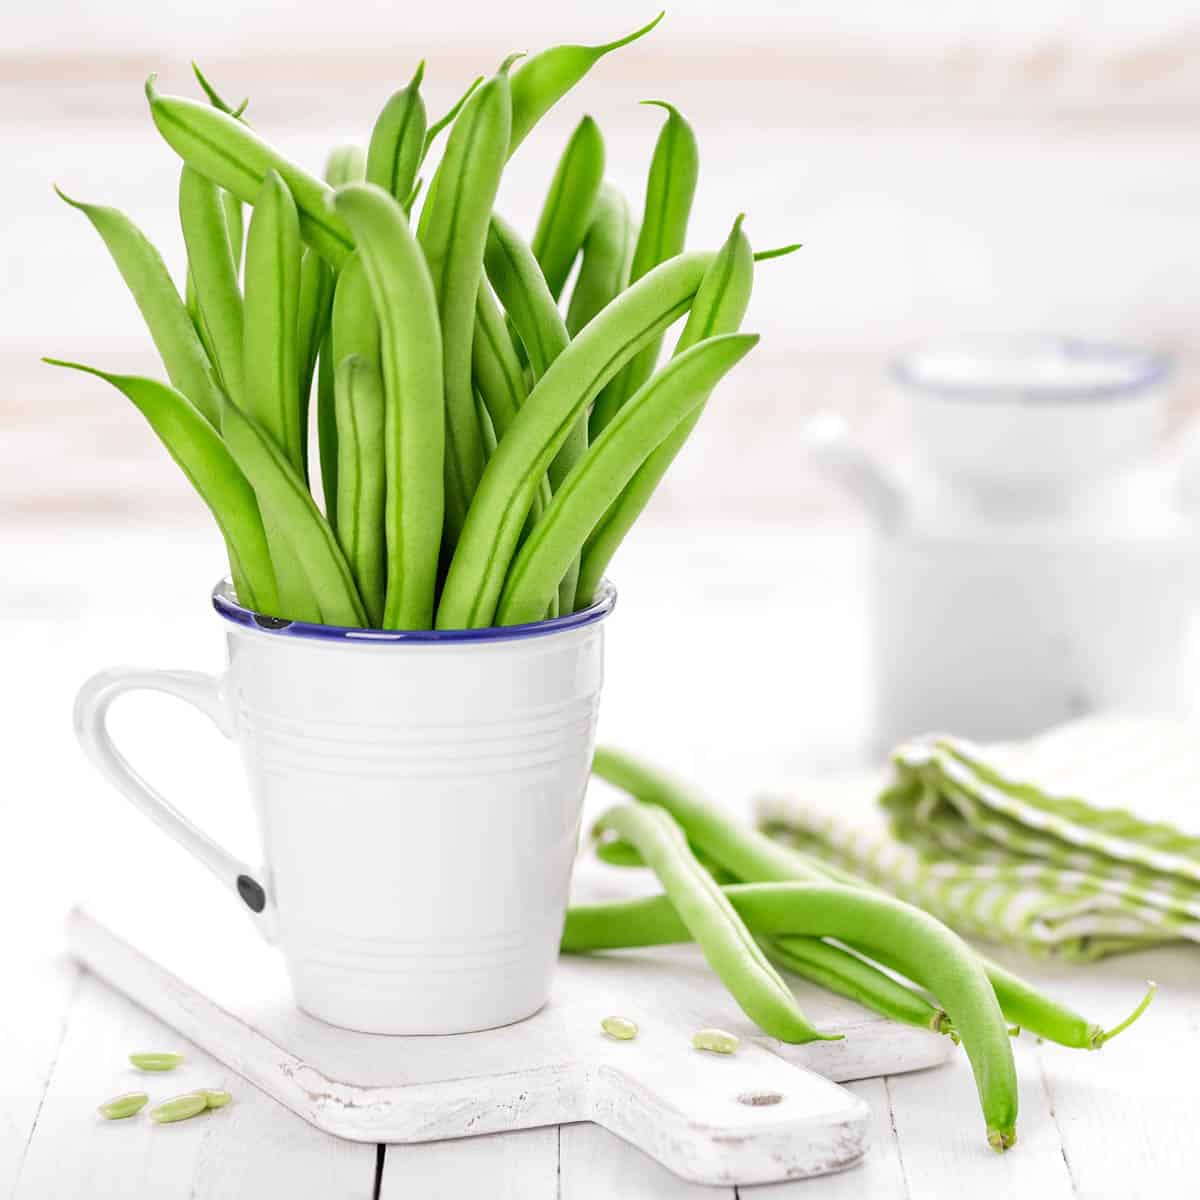 Green beans standing in a white coffee cup on a white cutting board.